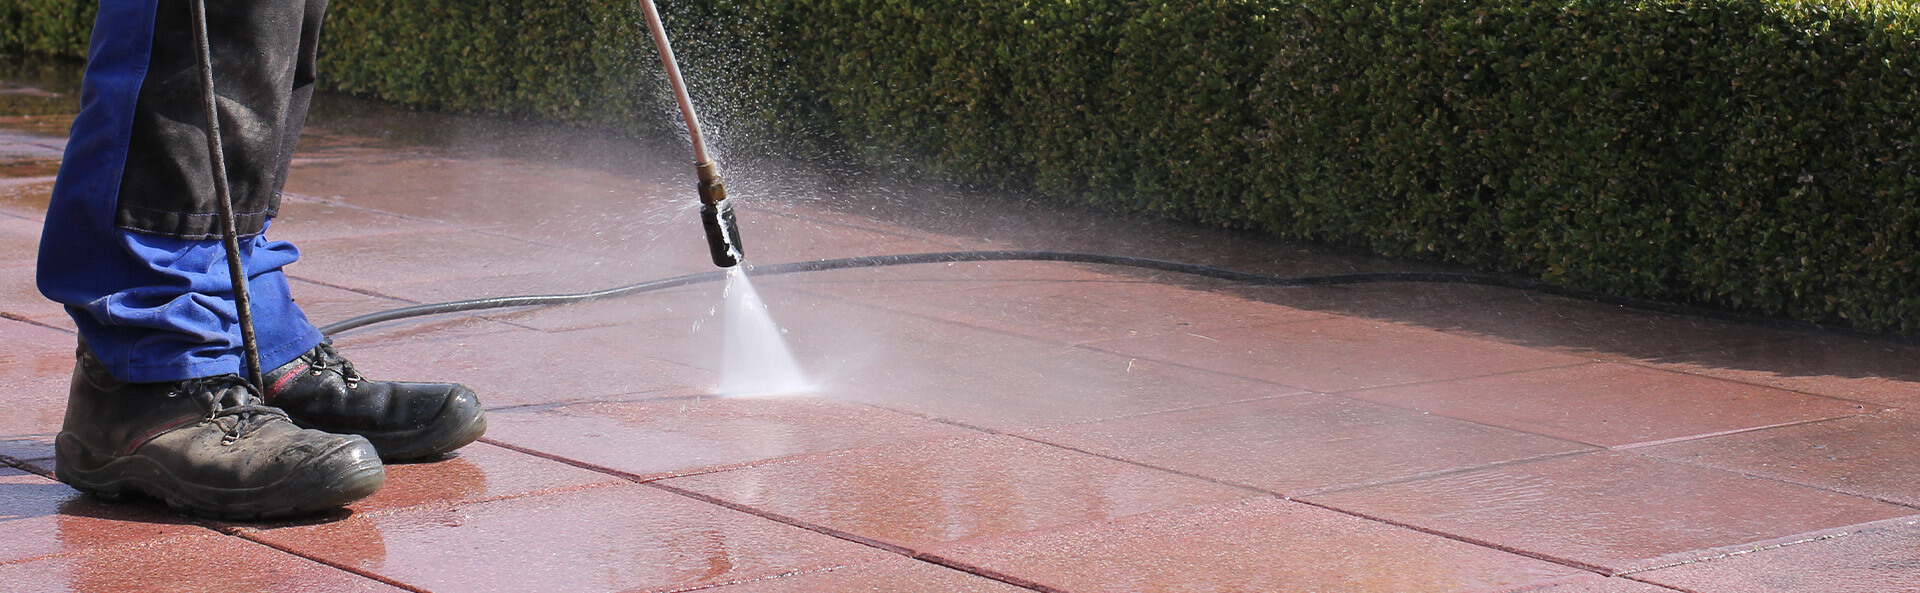 Copper State Pressure LLC Pressure Washing Services, Power Washing Services and Window Cleaning Services slide 1